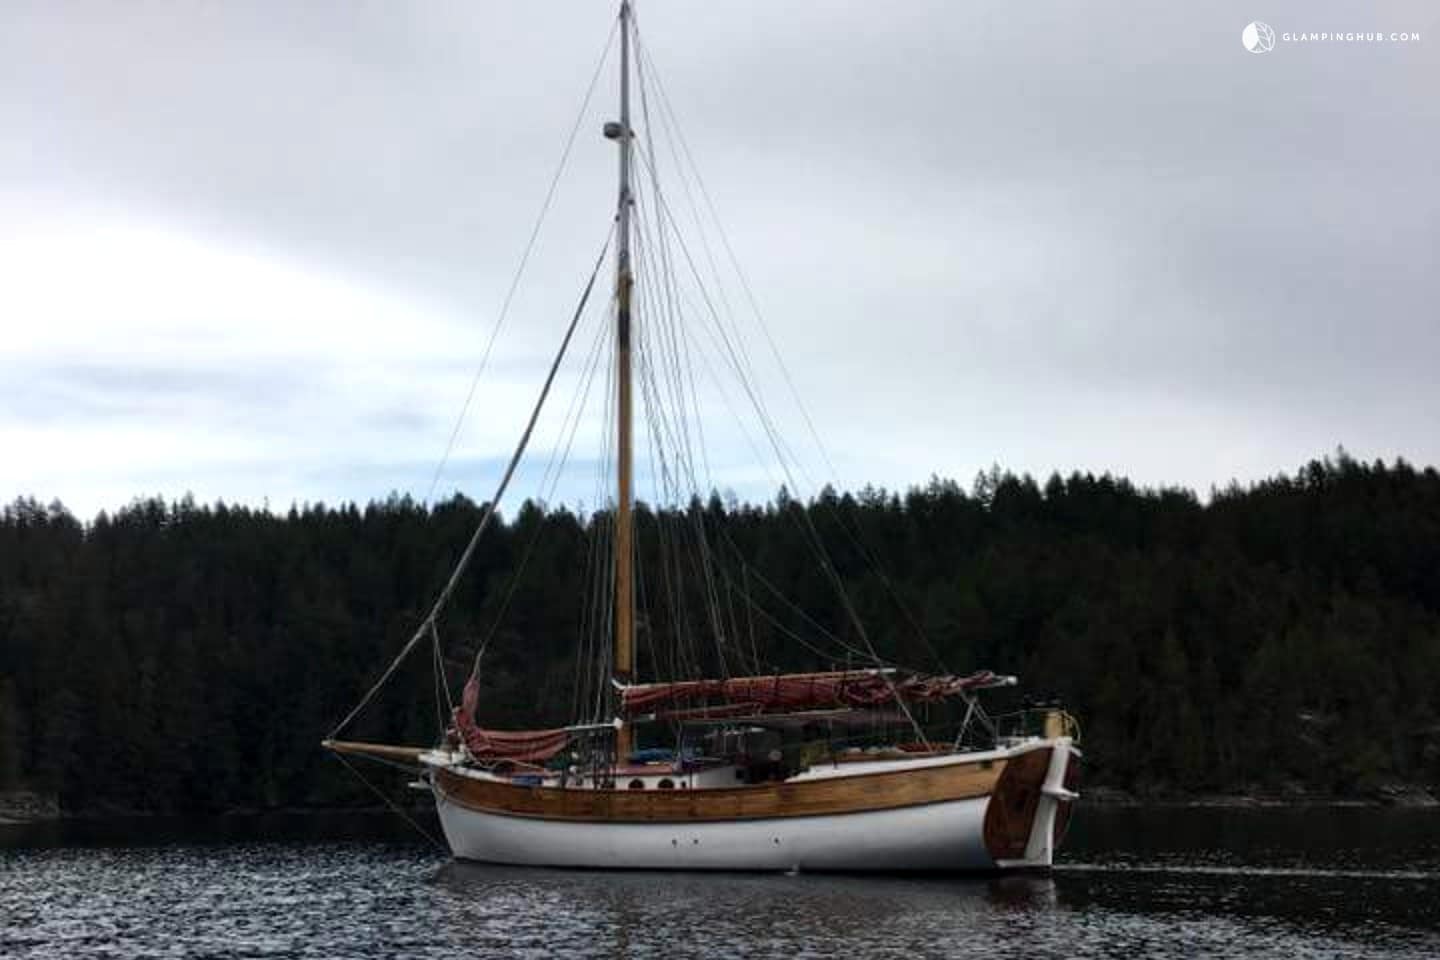 Glamping in the Pacific Northwest: Washington Sail Boat